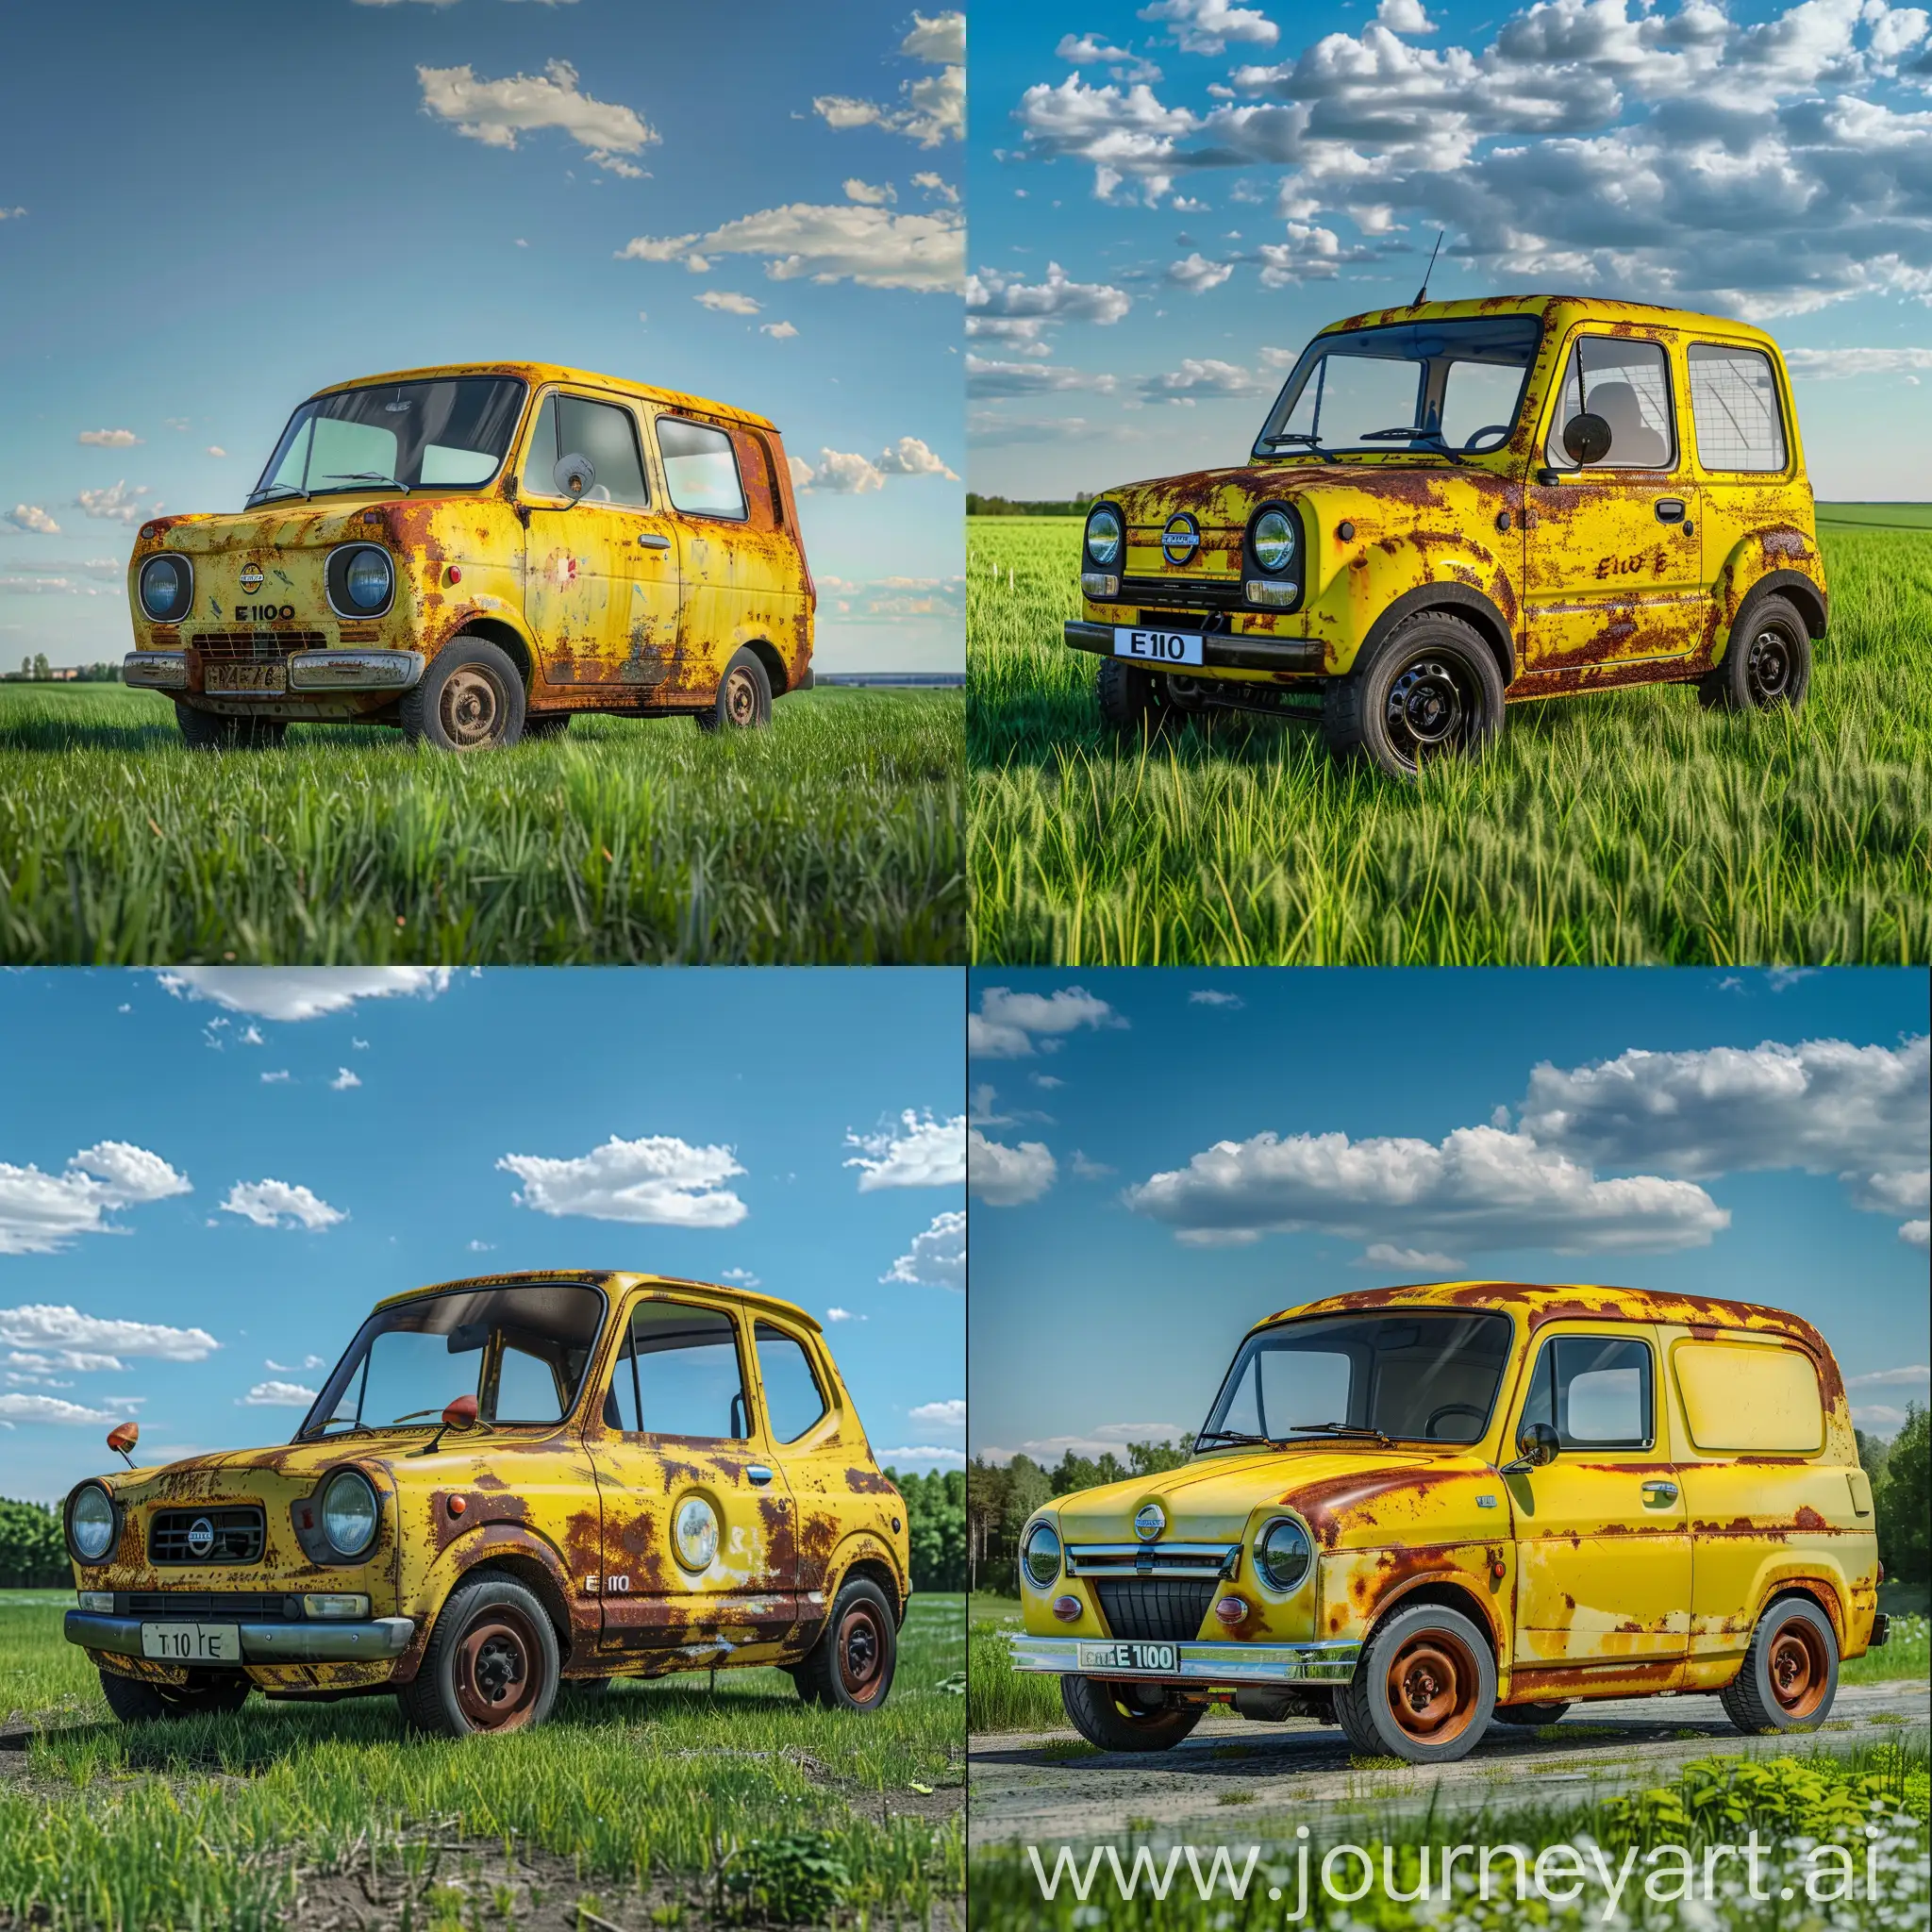 Yellow-Rusty-Nissan-Cherry-E10-in-Moscow-with-Beautiful-Green-Grass-Under-Blue-Sky